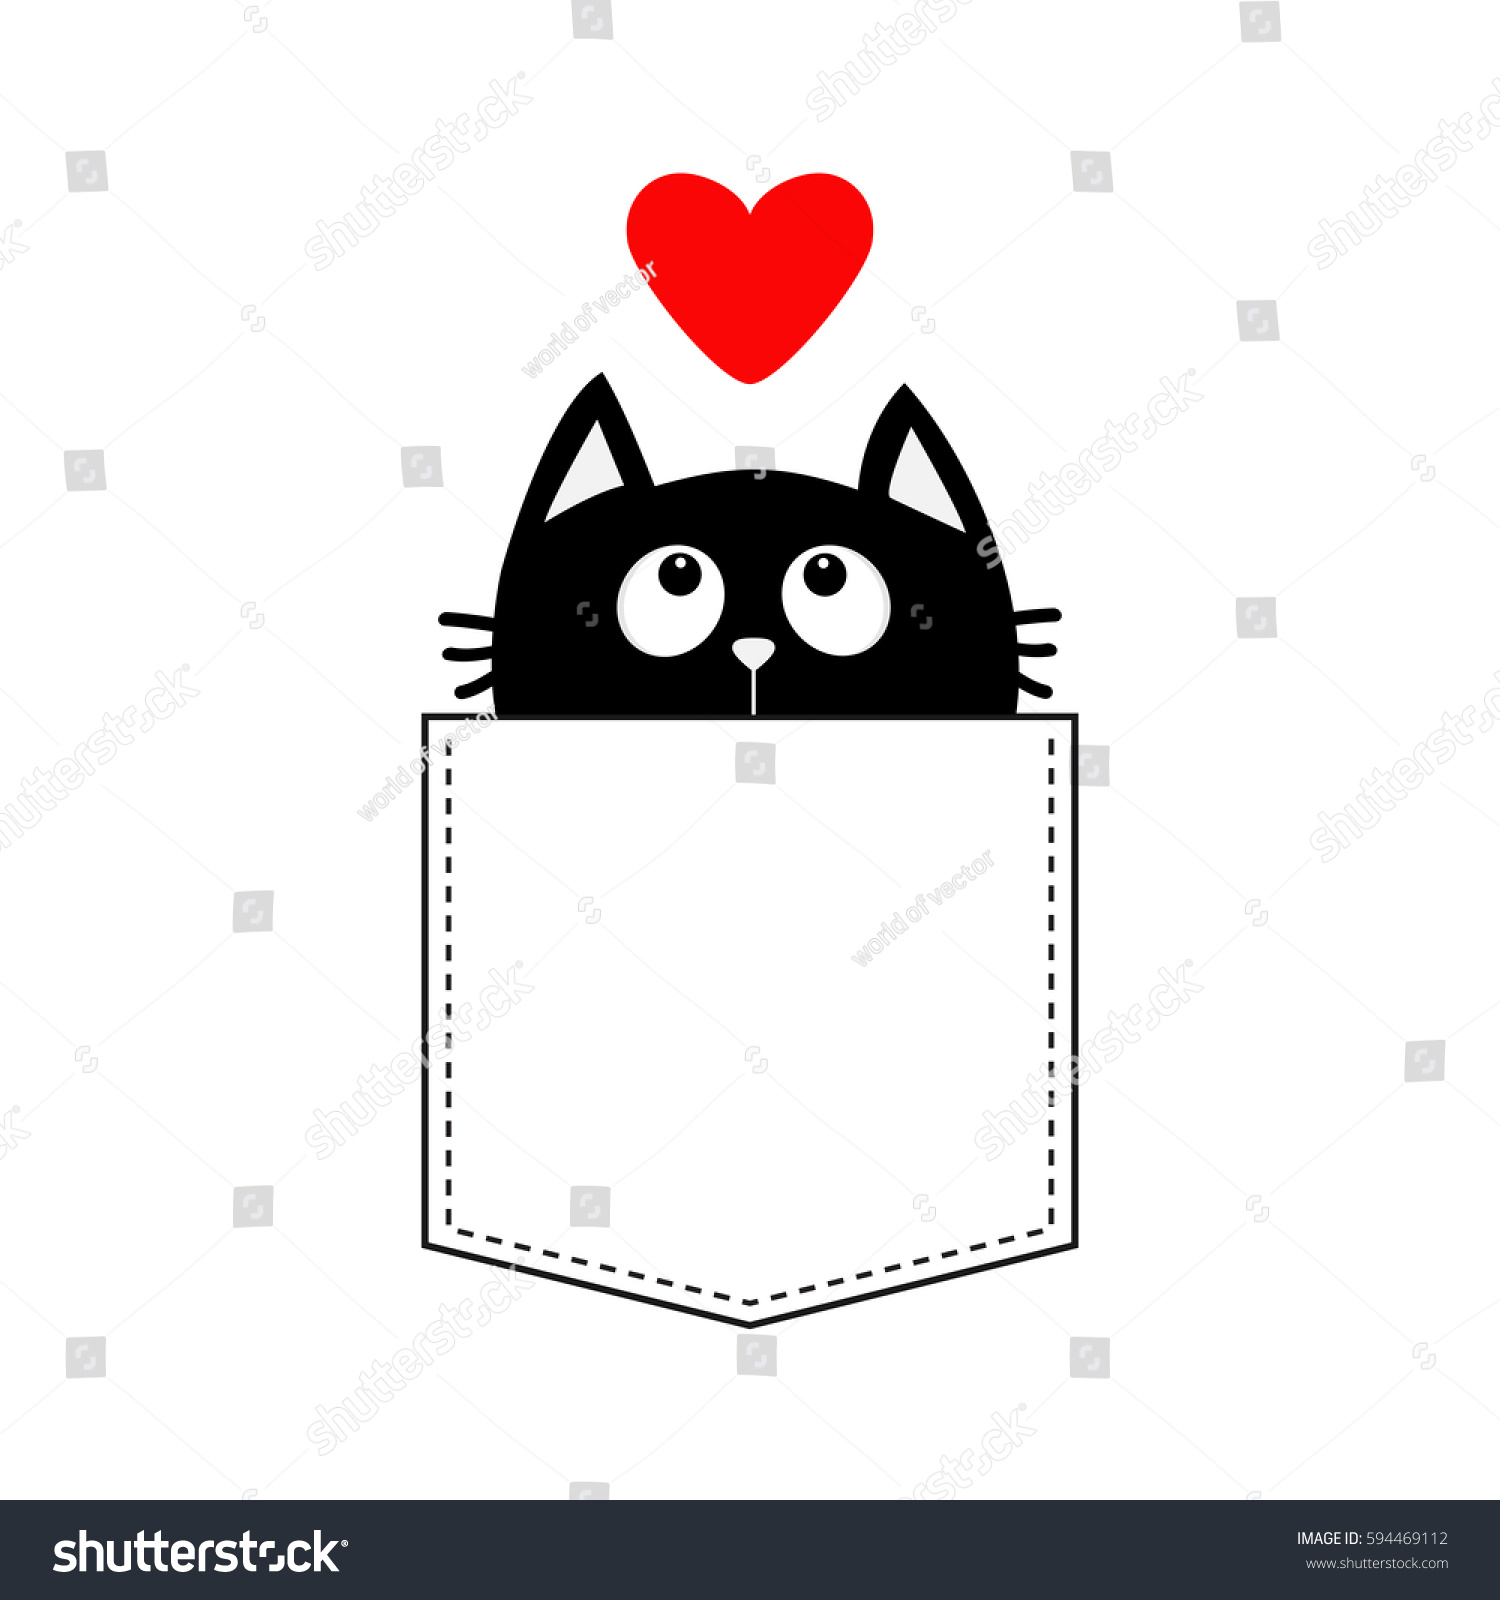 SVG of Black cat in the pocket looking up to red heart. T-shirt design. Cute cartoon character. Kawaii animal. Love Greeting card. Flat design style. White background. Isolated. Vector illustration svg